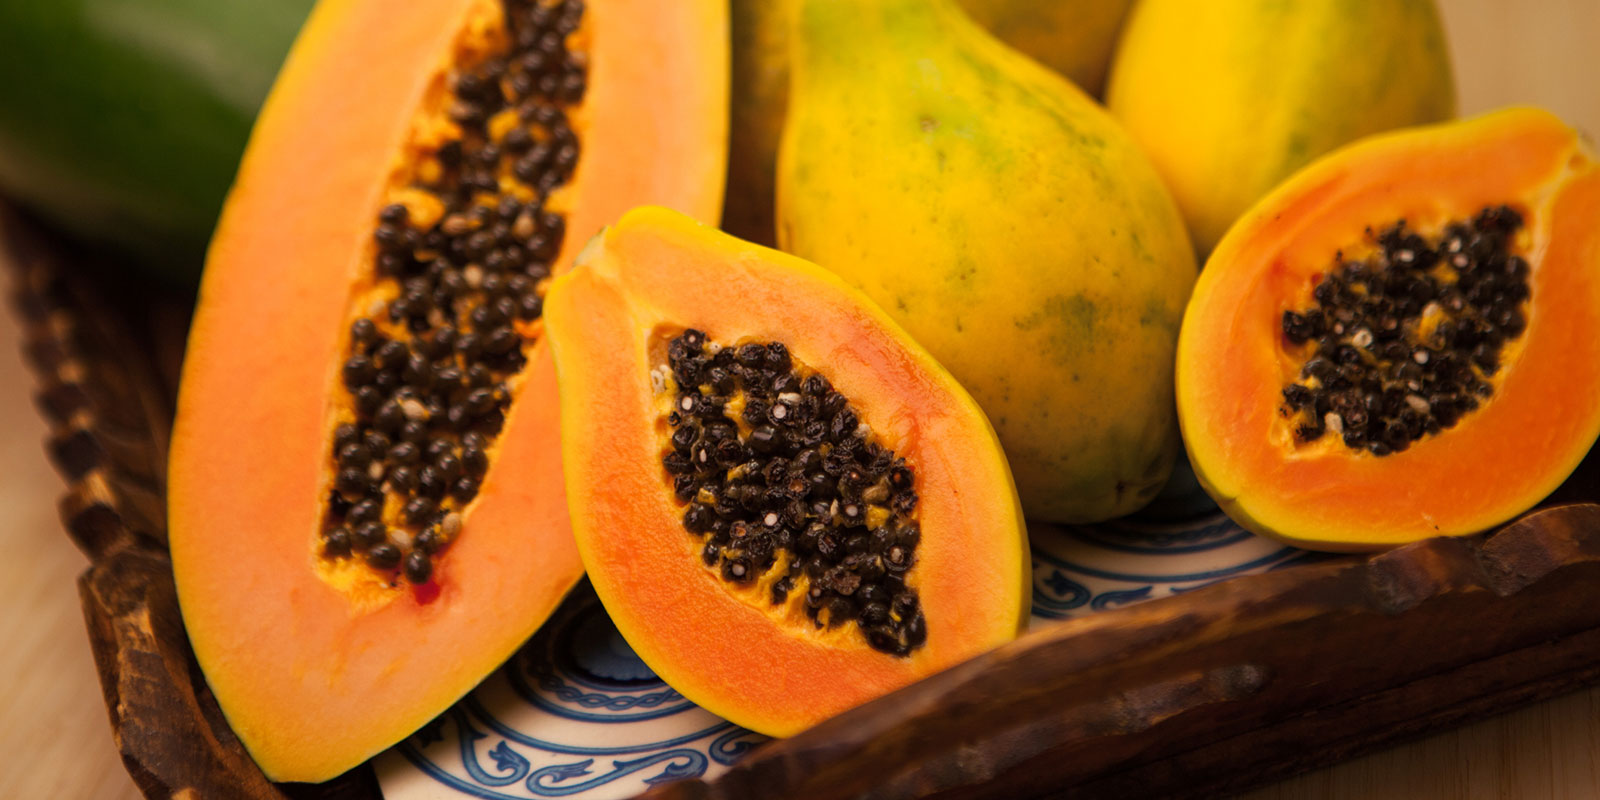 Papaya Plants / How can you tell the “gender” of the Papaya fruit you are eating?